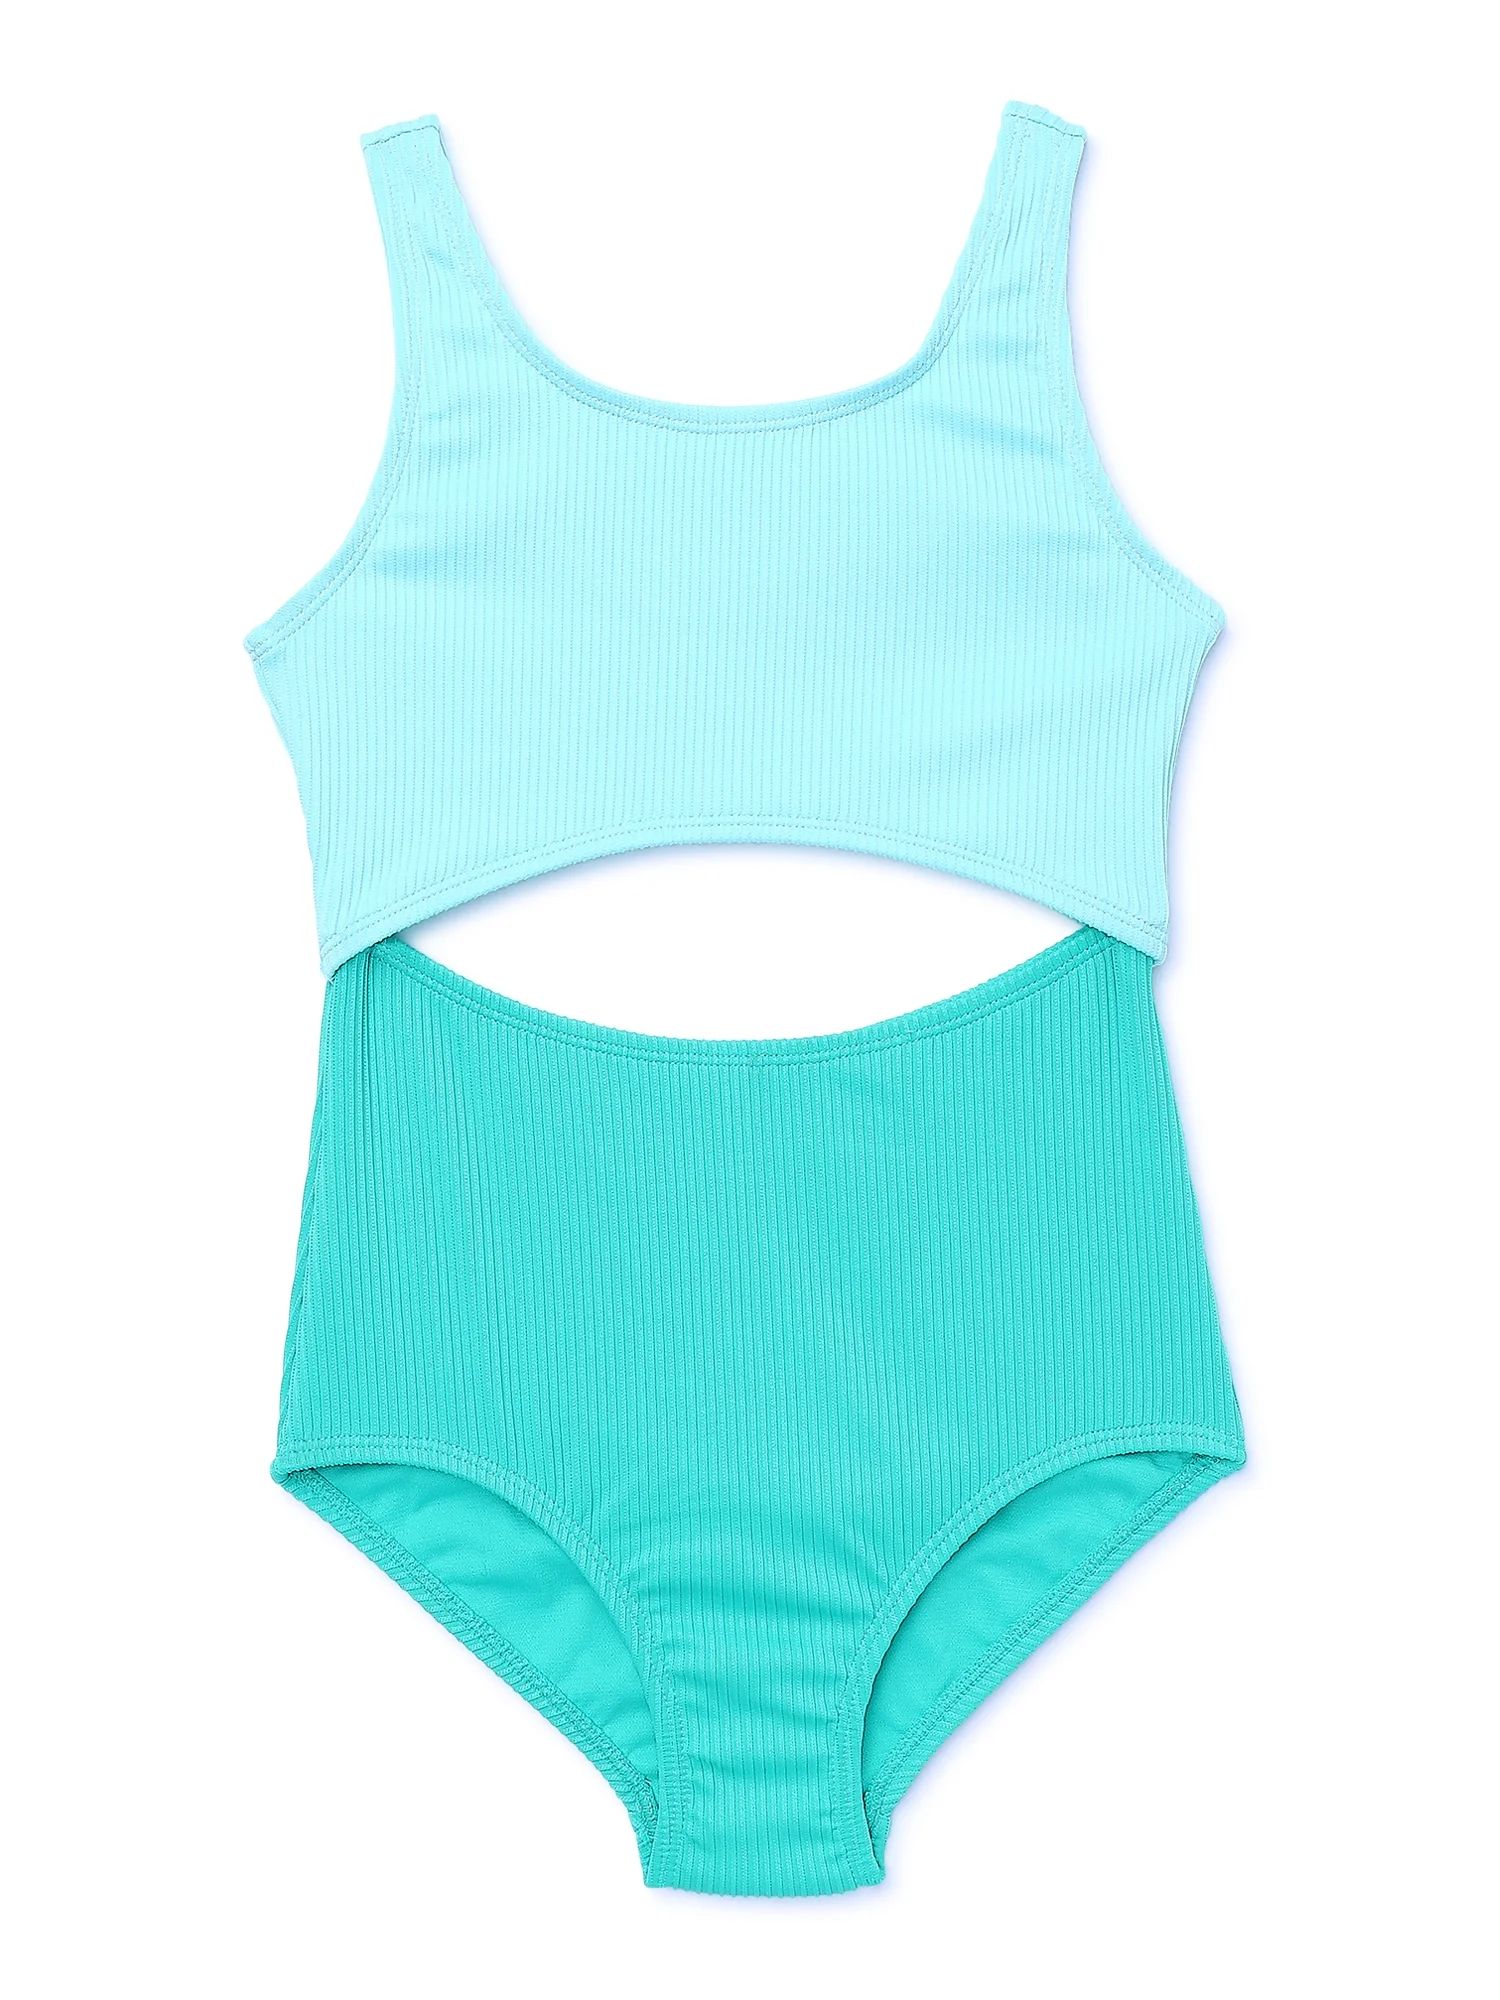 Wonder Nation Girls One-Piece Swimsuit with Cutouts and UPF 50, Sizes 4-18 & Plus | Walmart (US)